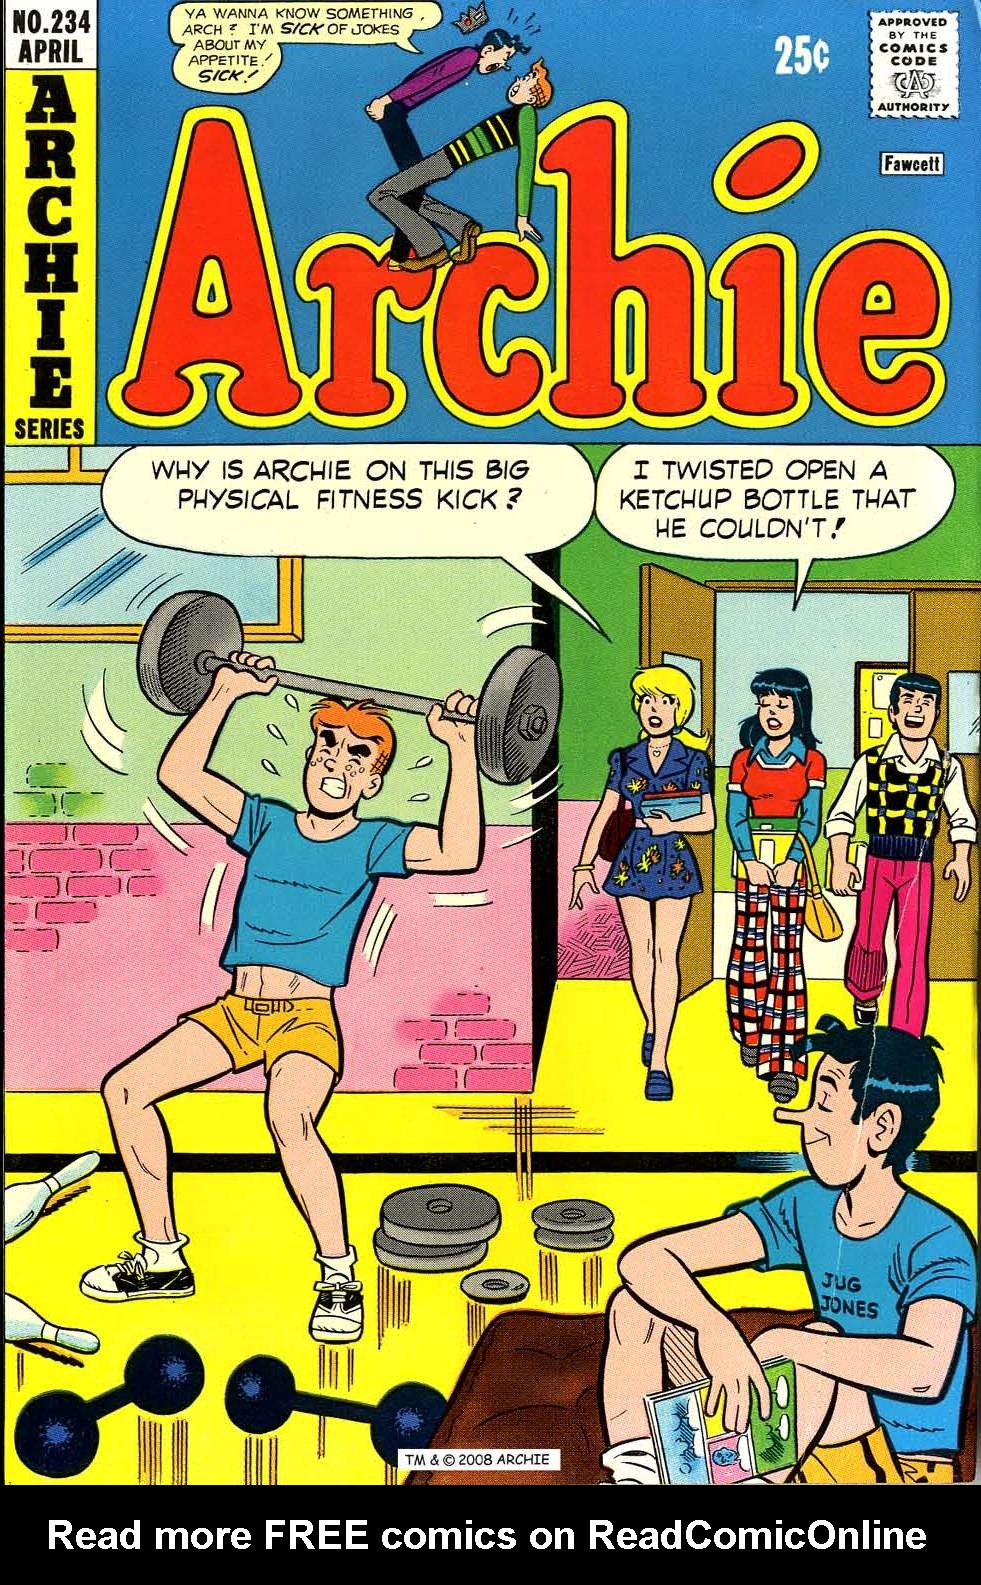 Read online Archie (1960) comic -  Issue #234 - 1